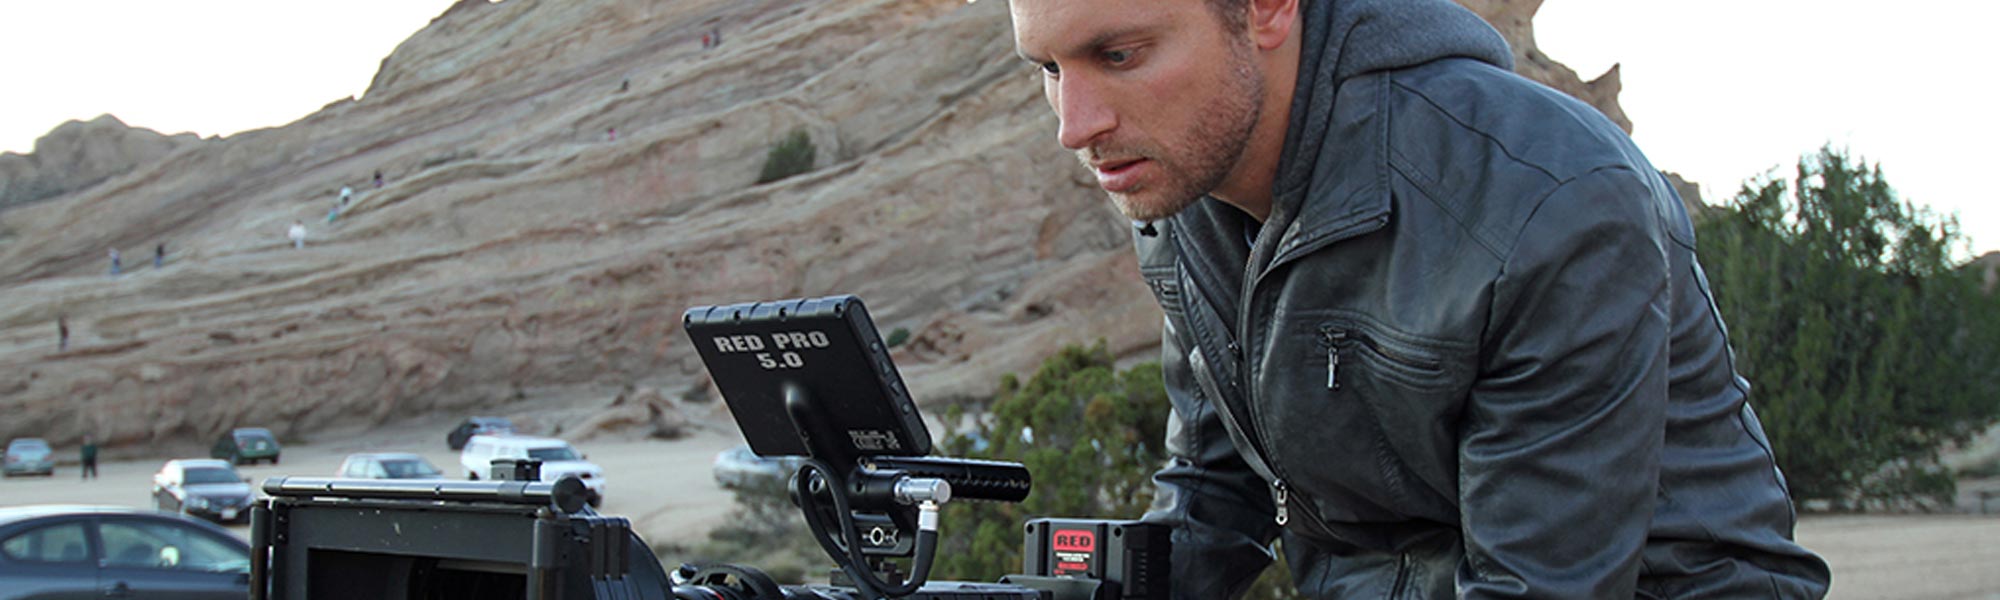 Working With the Pros: A Profile on Videographer Troy Gray